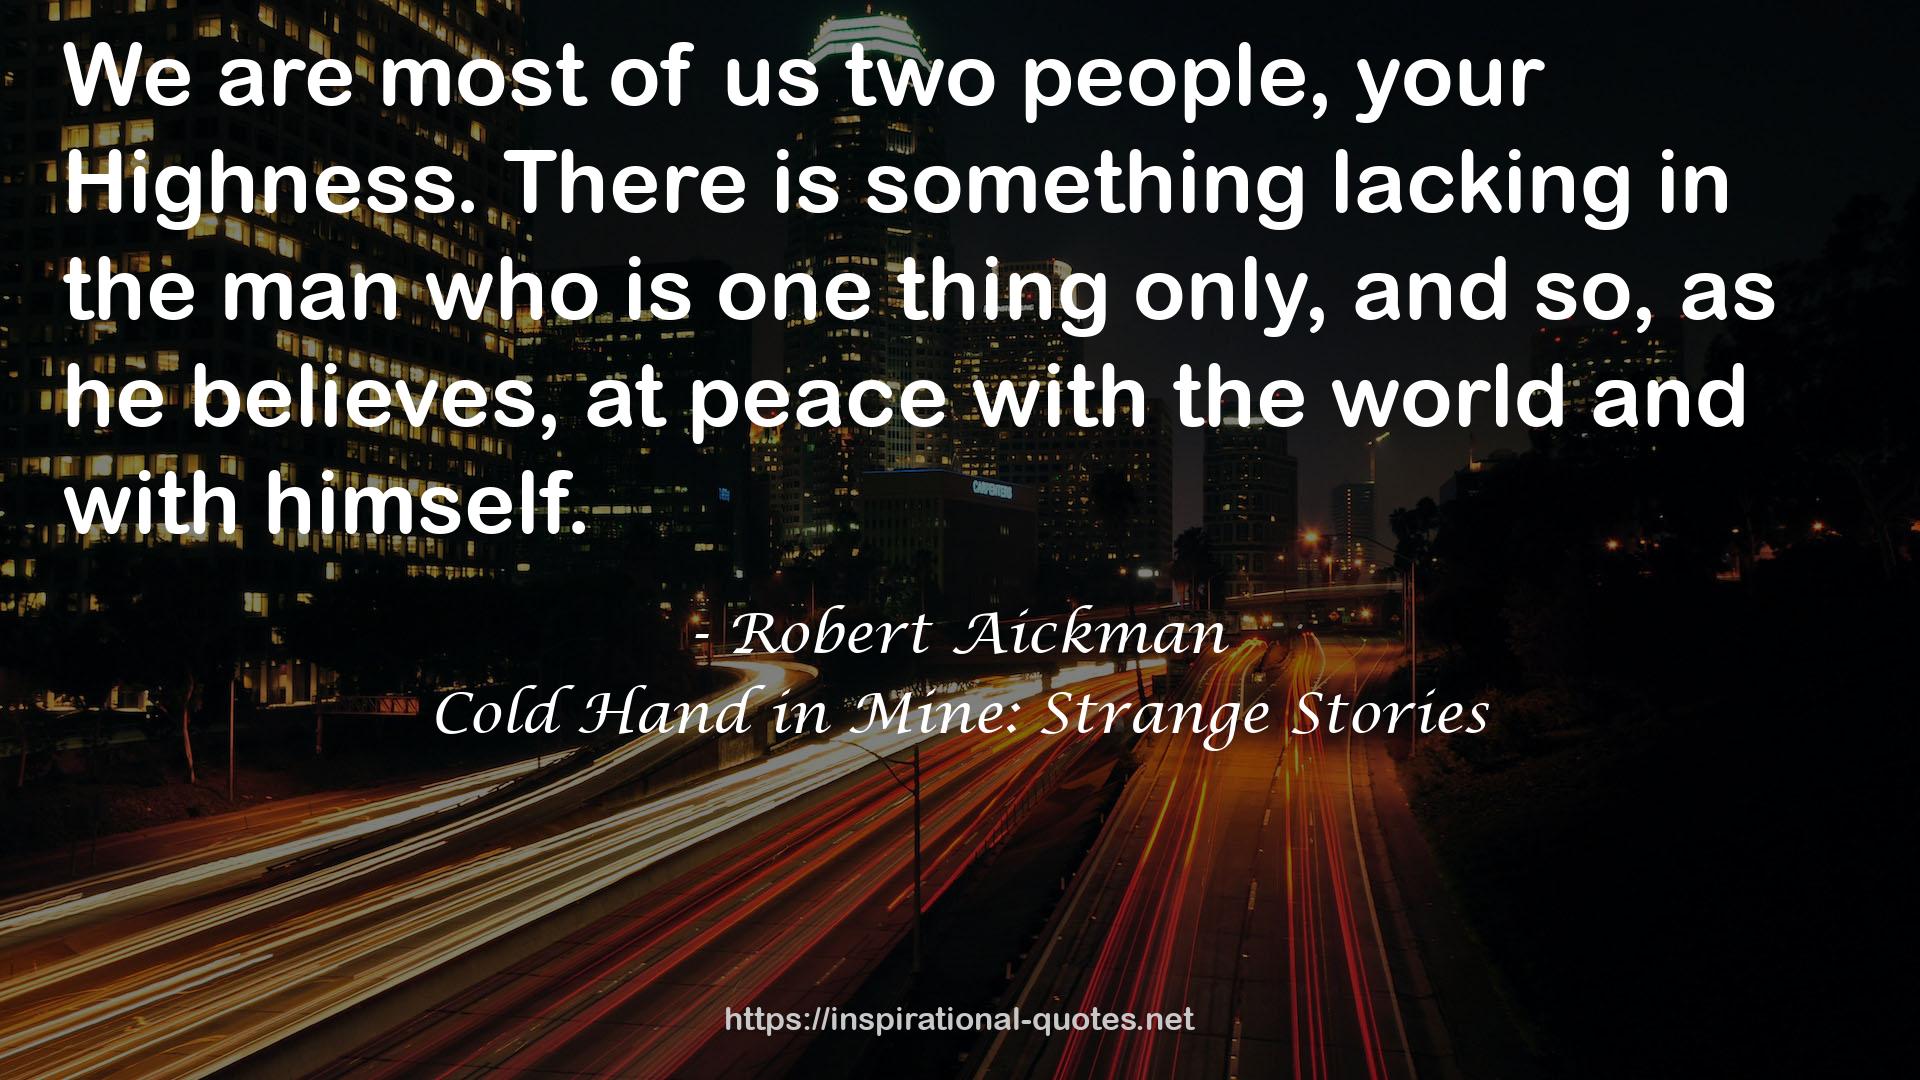 Cold Hand in Mine: Strange Stories QUOTES